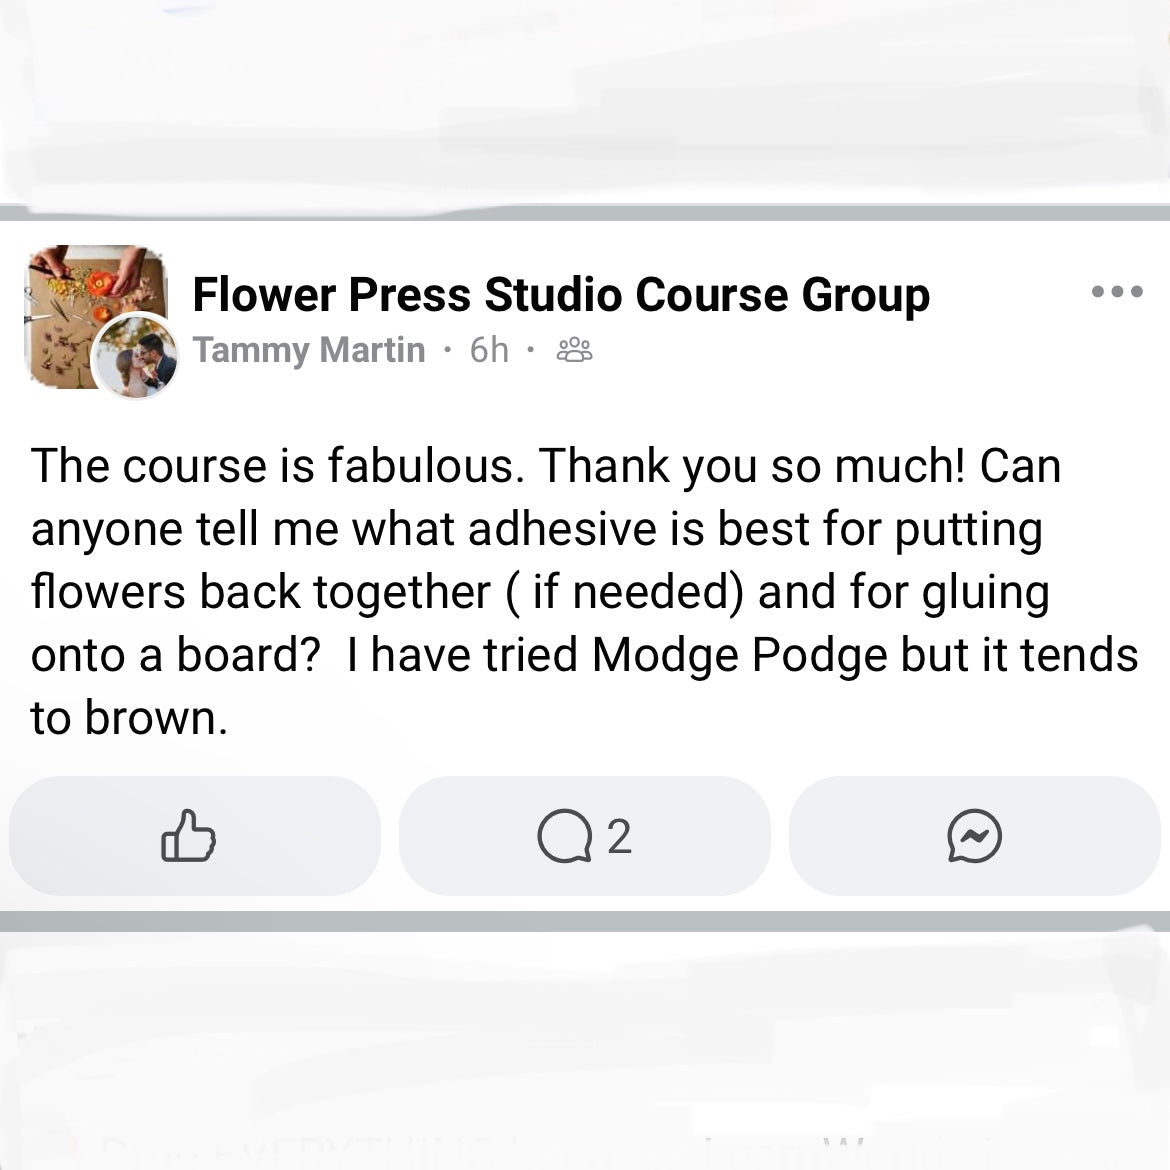 A review from a customer about how great a flower pressing course is.